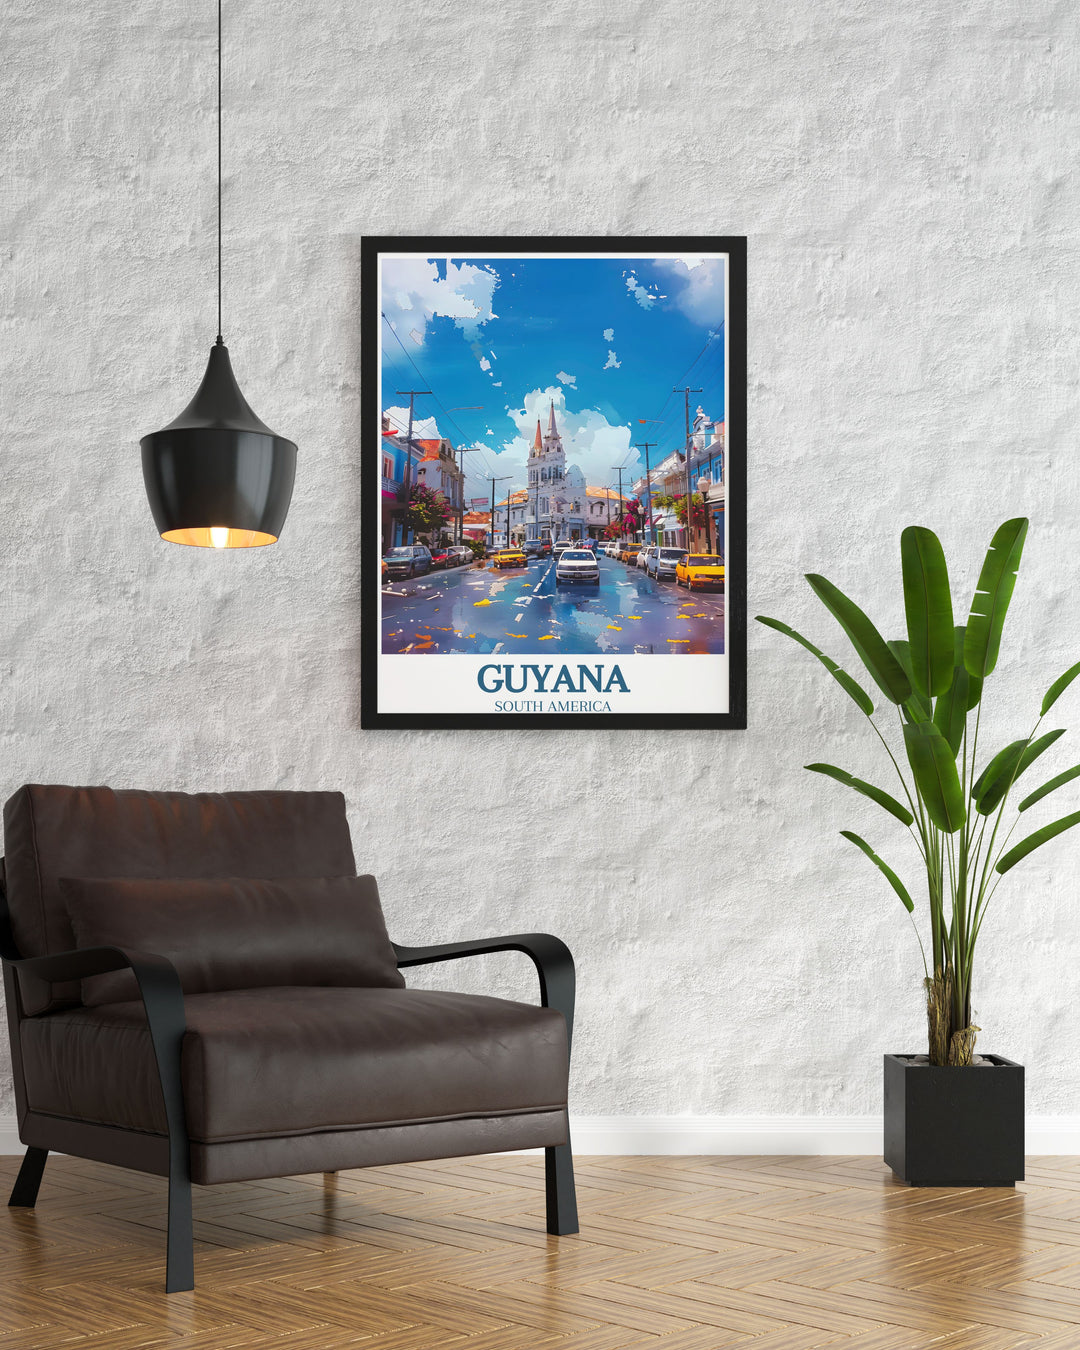 Showcasing the blend of history and modernity in Georgetown, this travel poster features detailed illustrations of the citys landmarks and vibrant scenes, perfect for creating a lively atmosphere in any room.